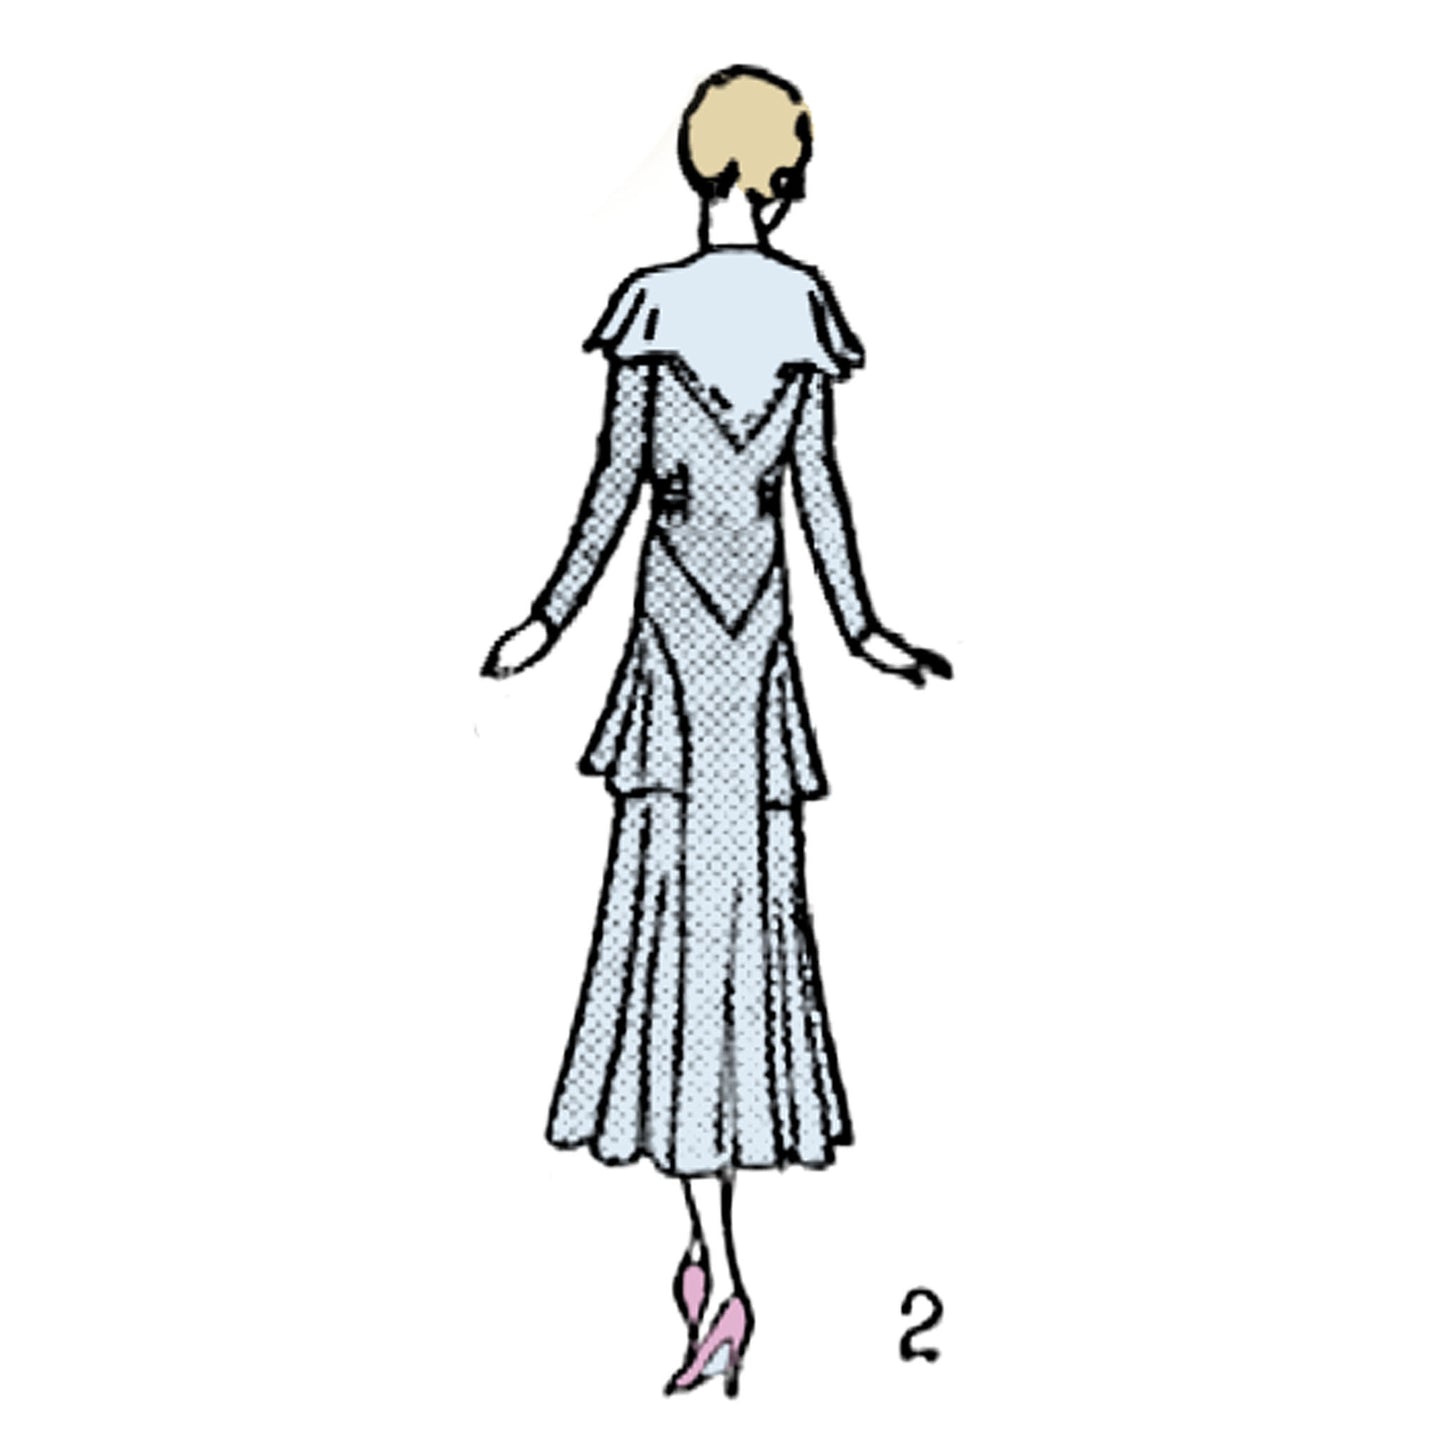 Women wearing Frock dress made from 1930's pattern Excella 3456 - back view